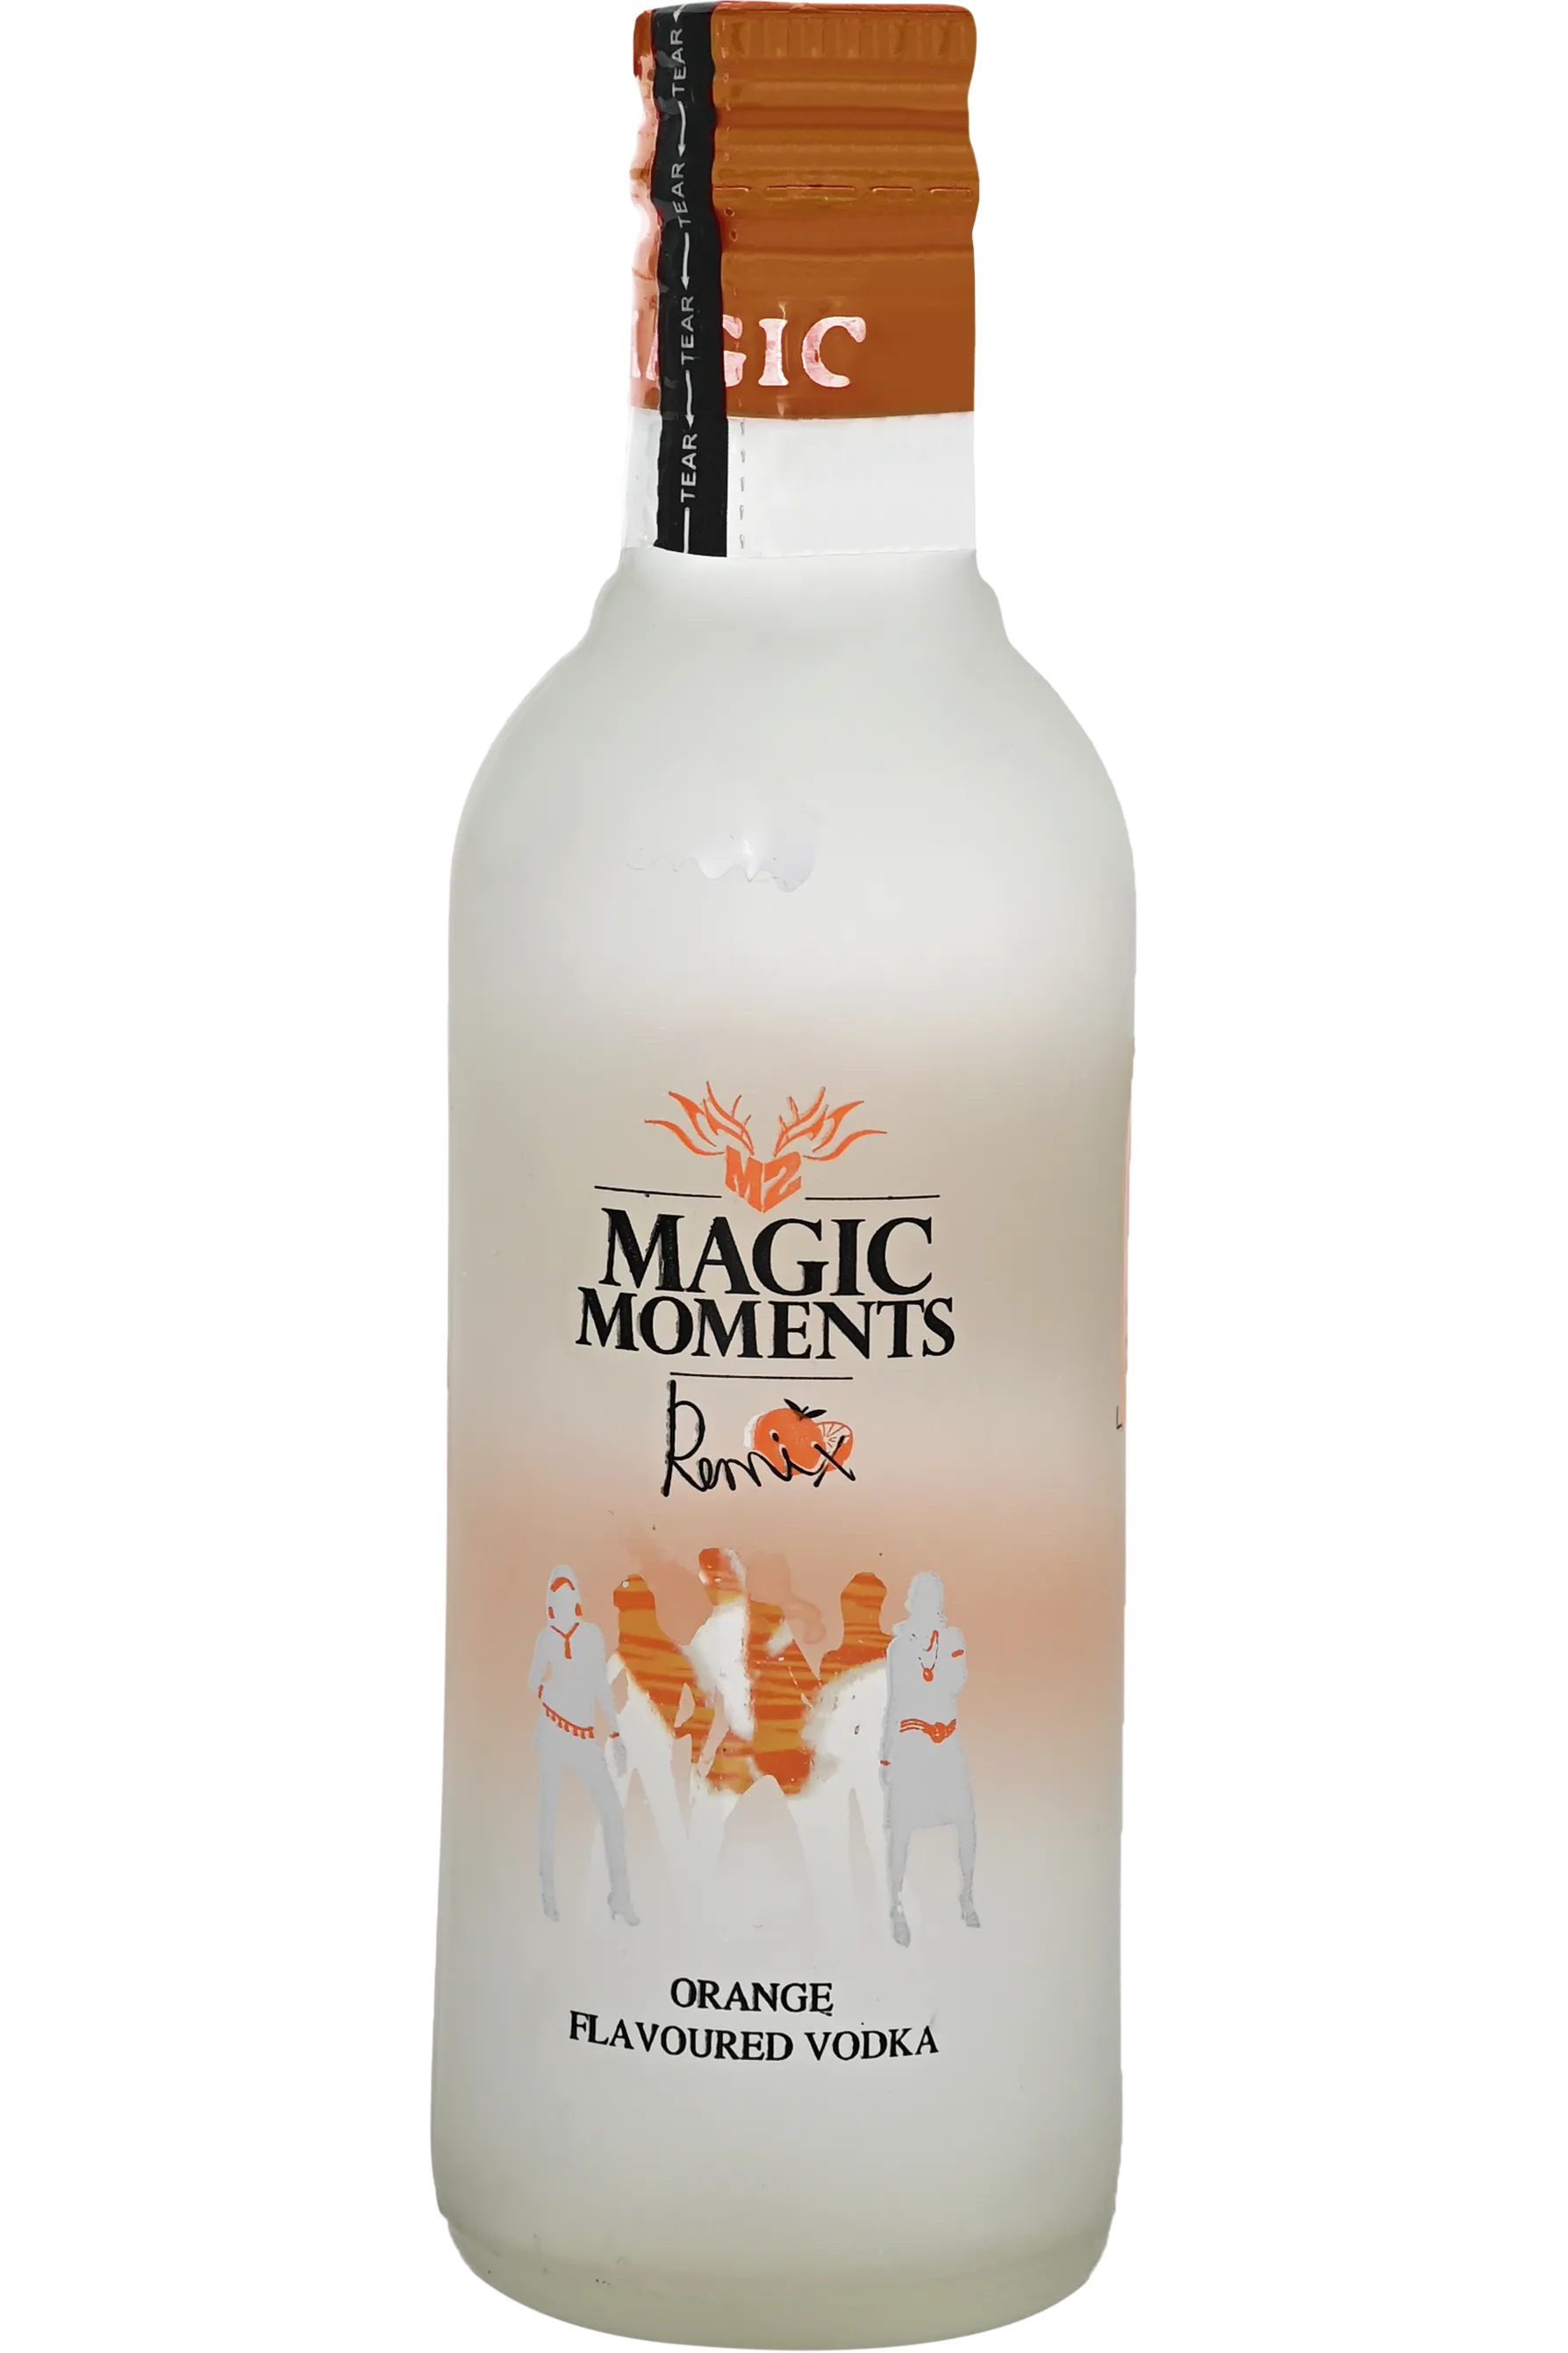 Buy Magic Moments Remix Orange Flavoured Vodka Available in 375 ml ...